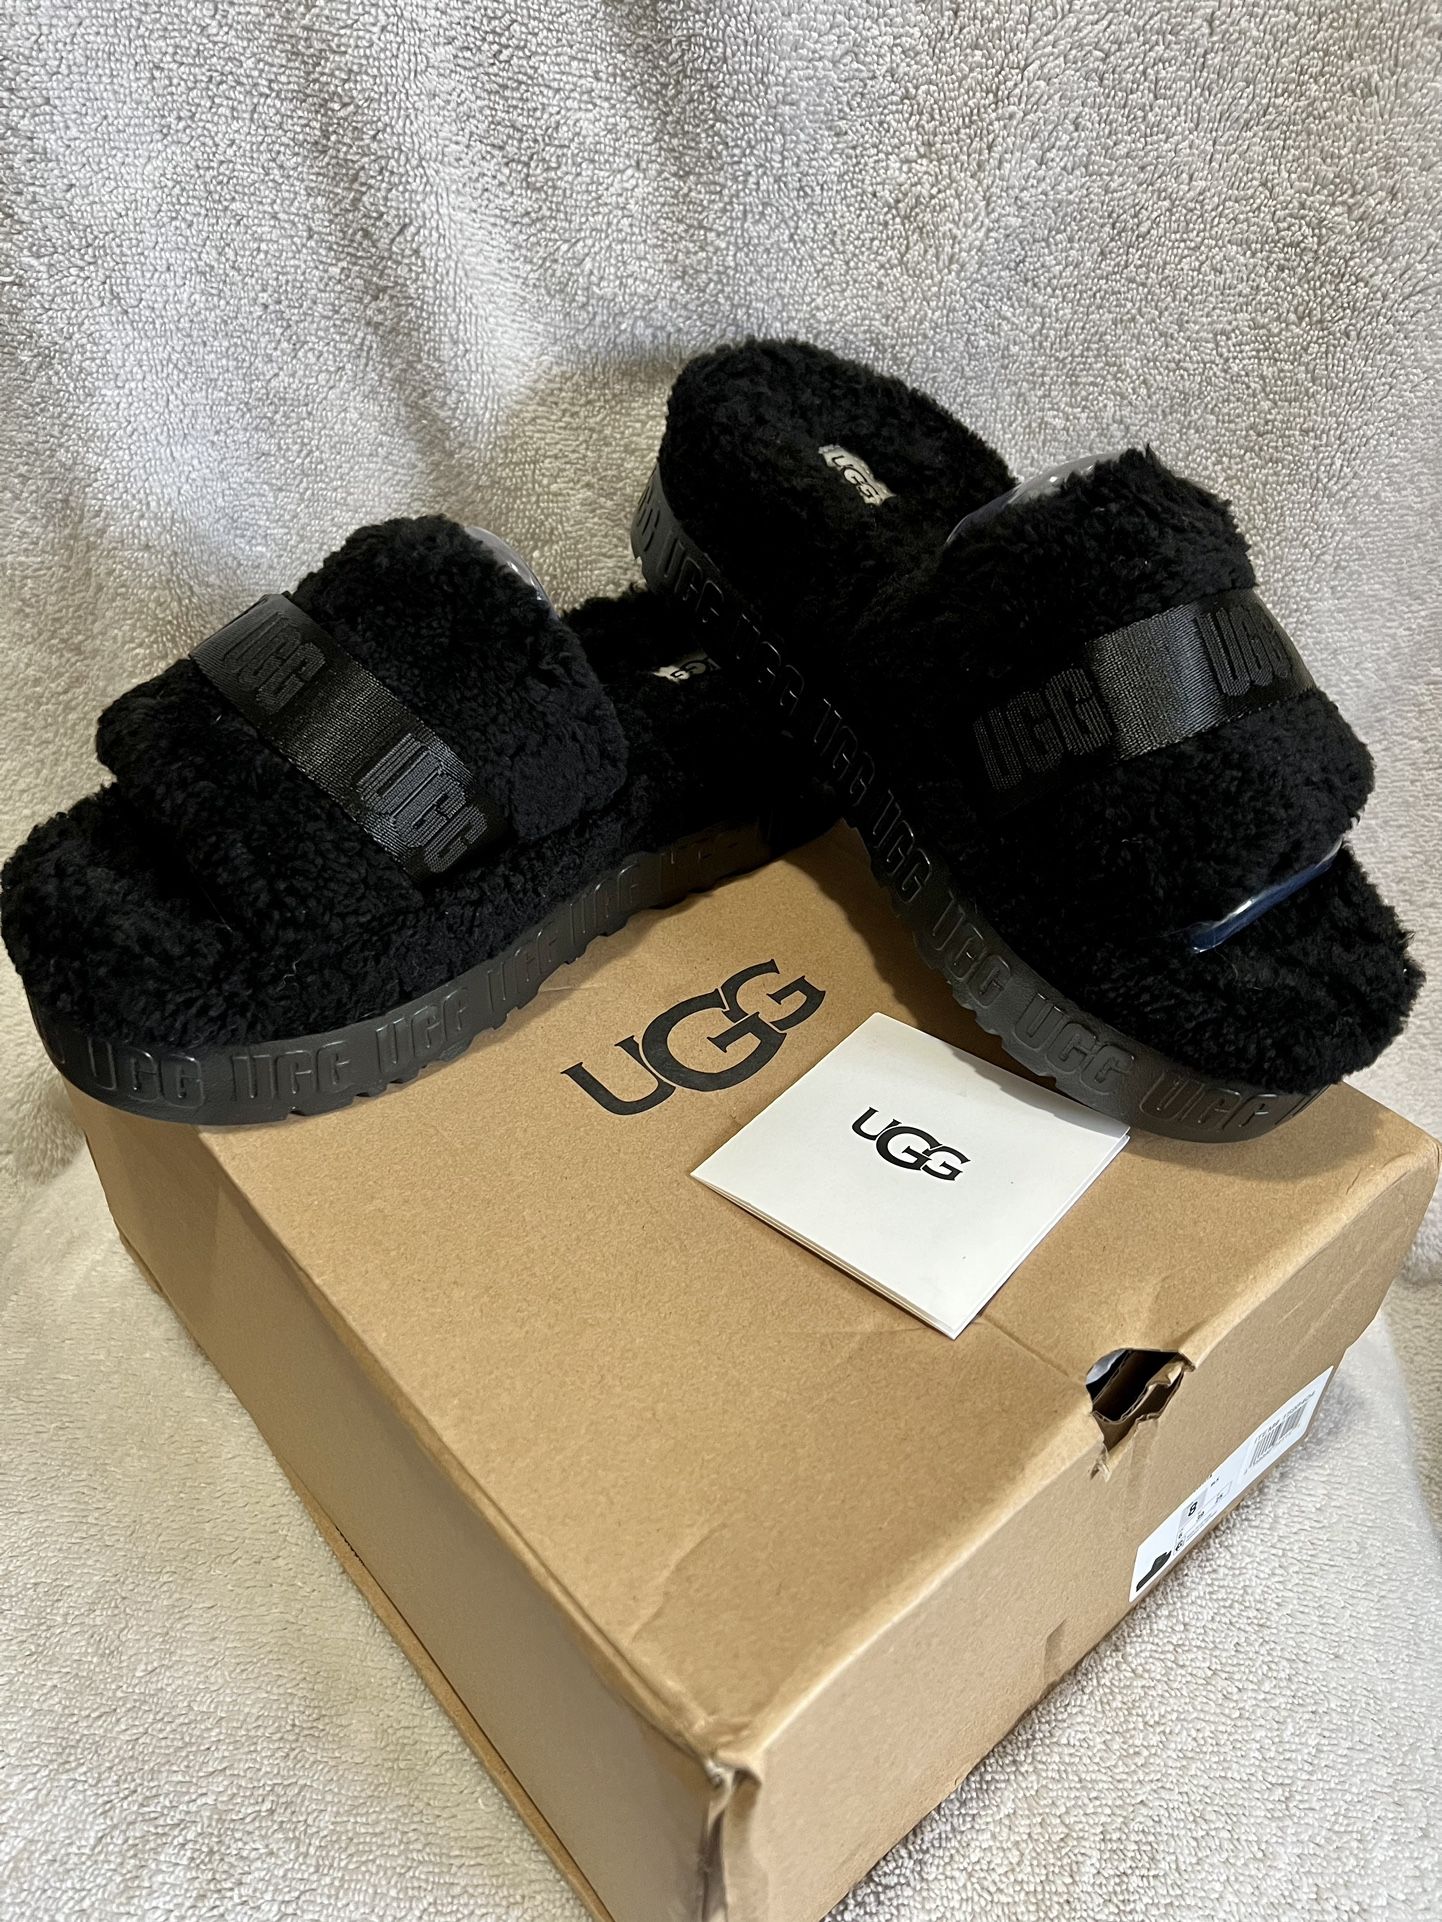 Ugg Woman’s Size 8 And 10 Slippers Black Authentic 💯 